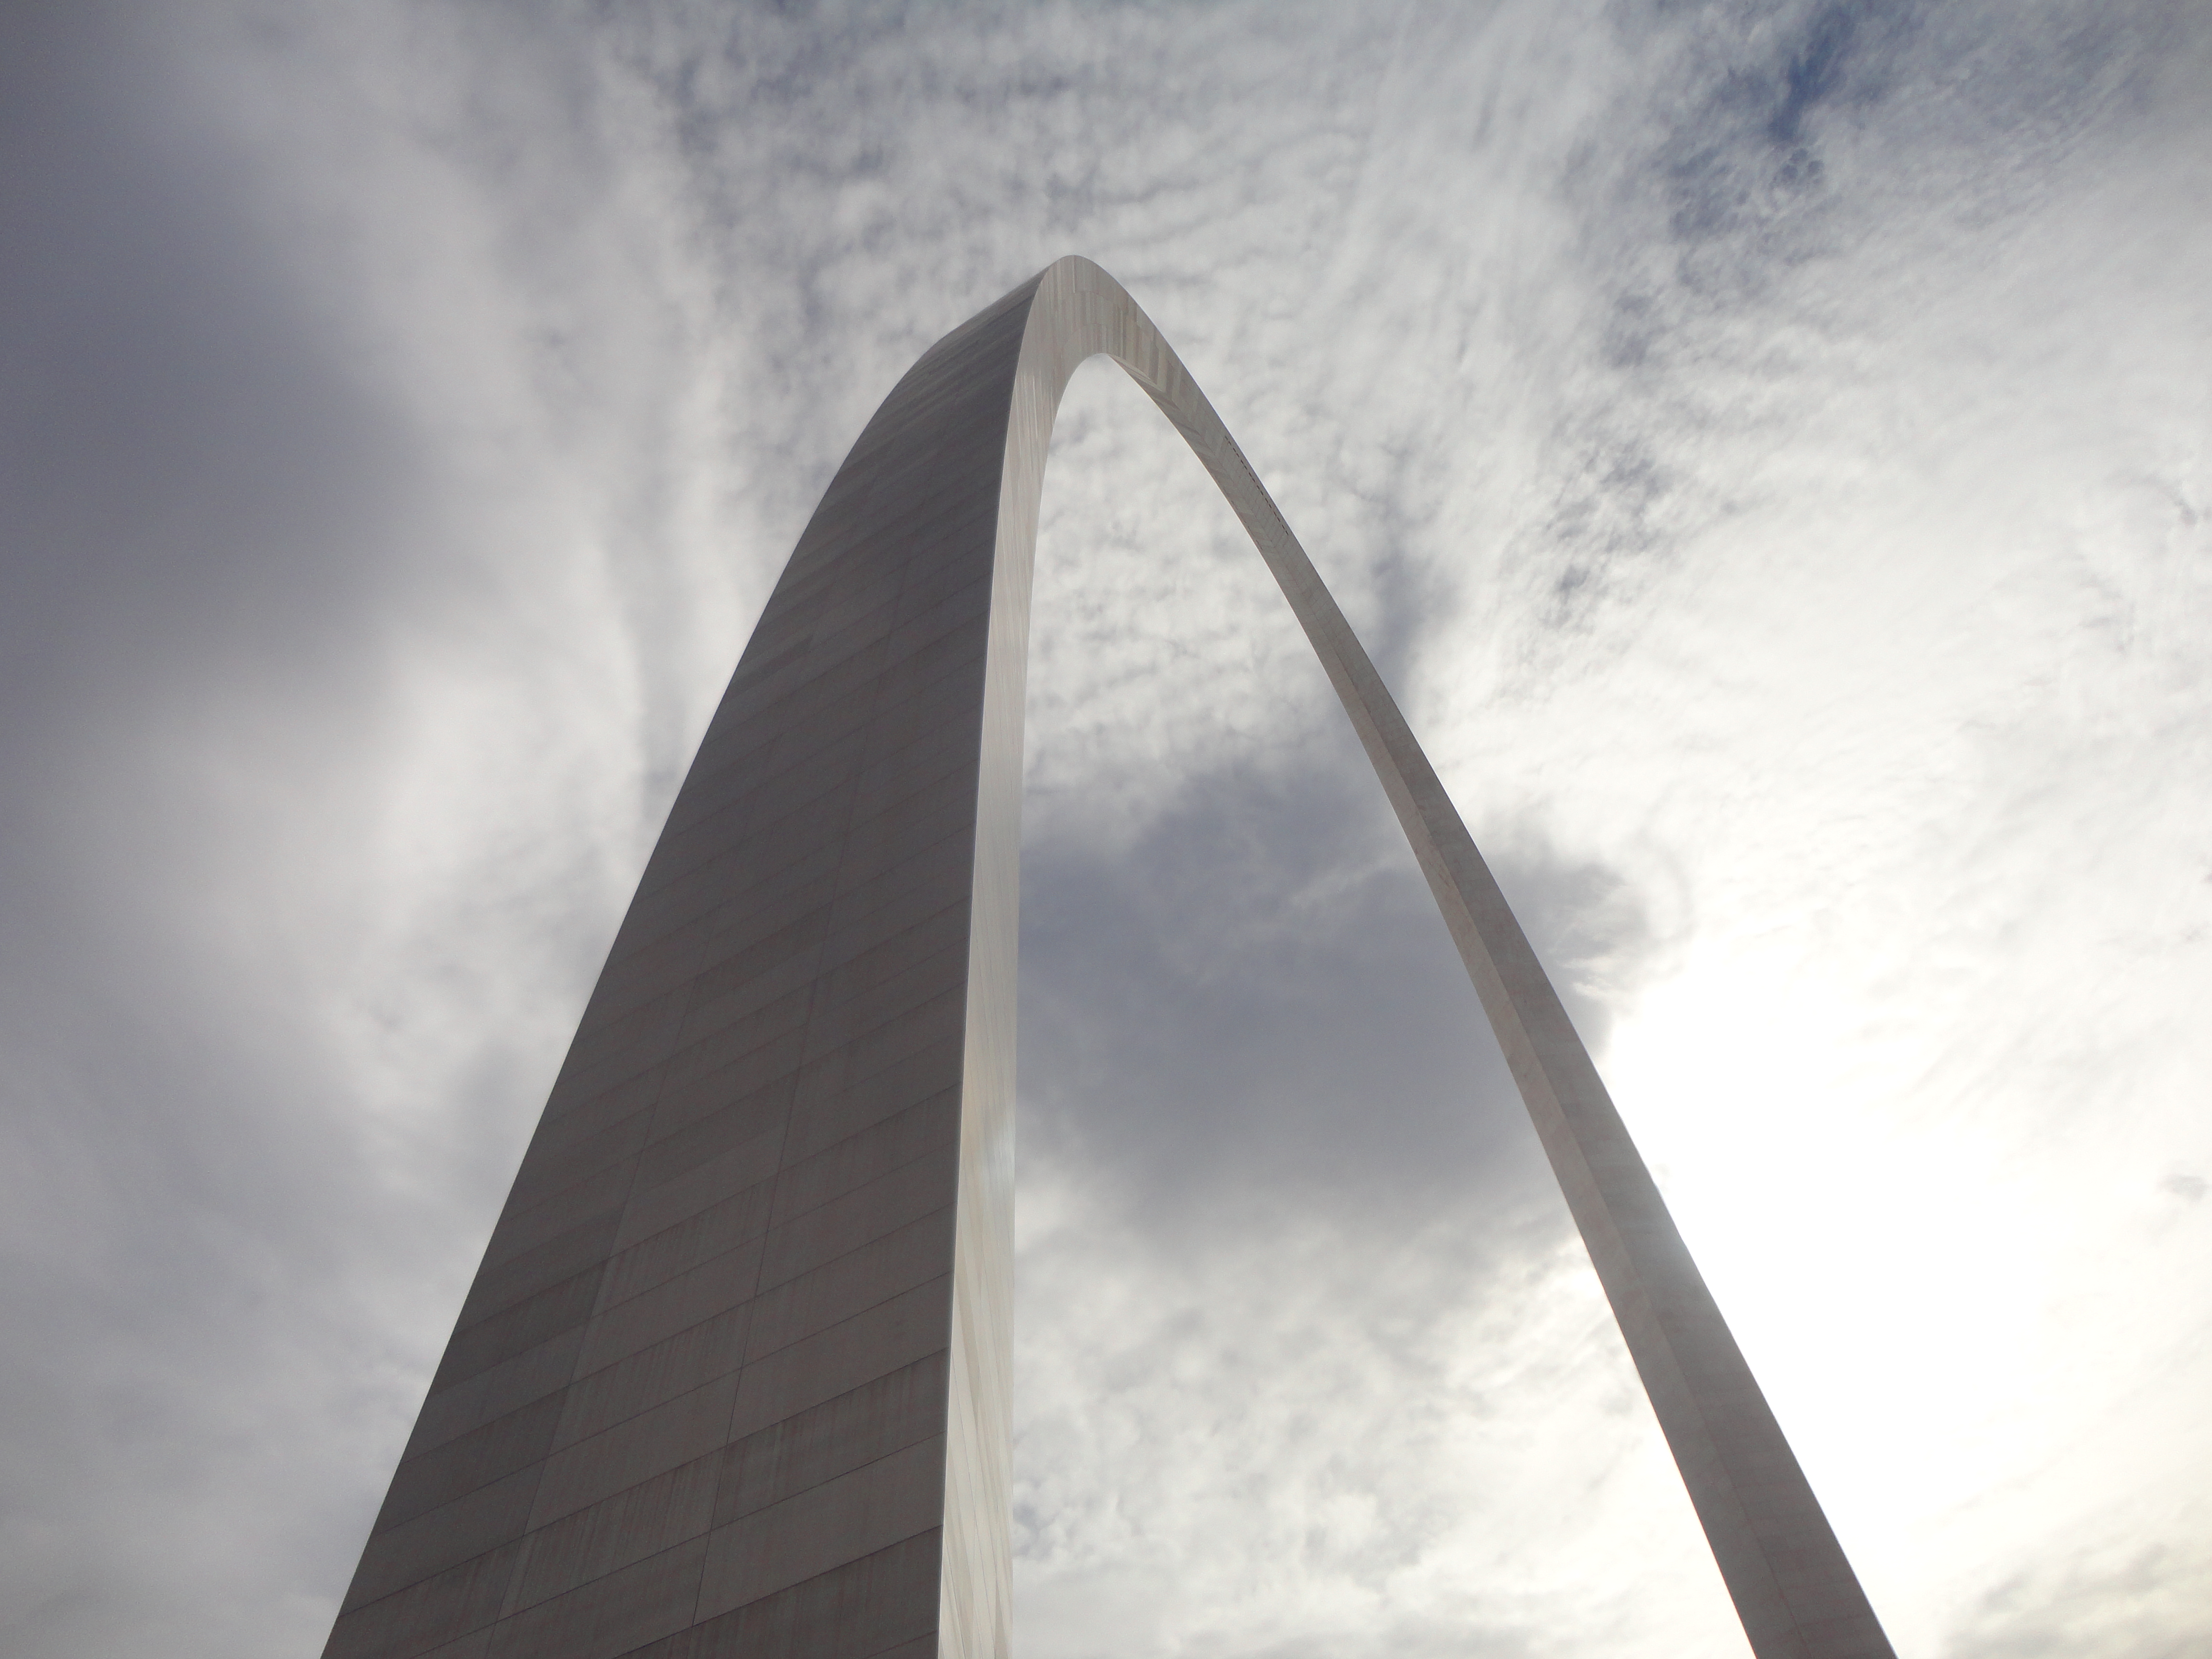 The St. Louis Arch, way up high!